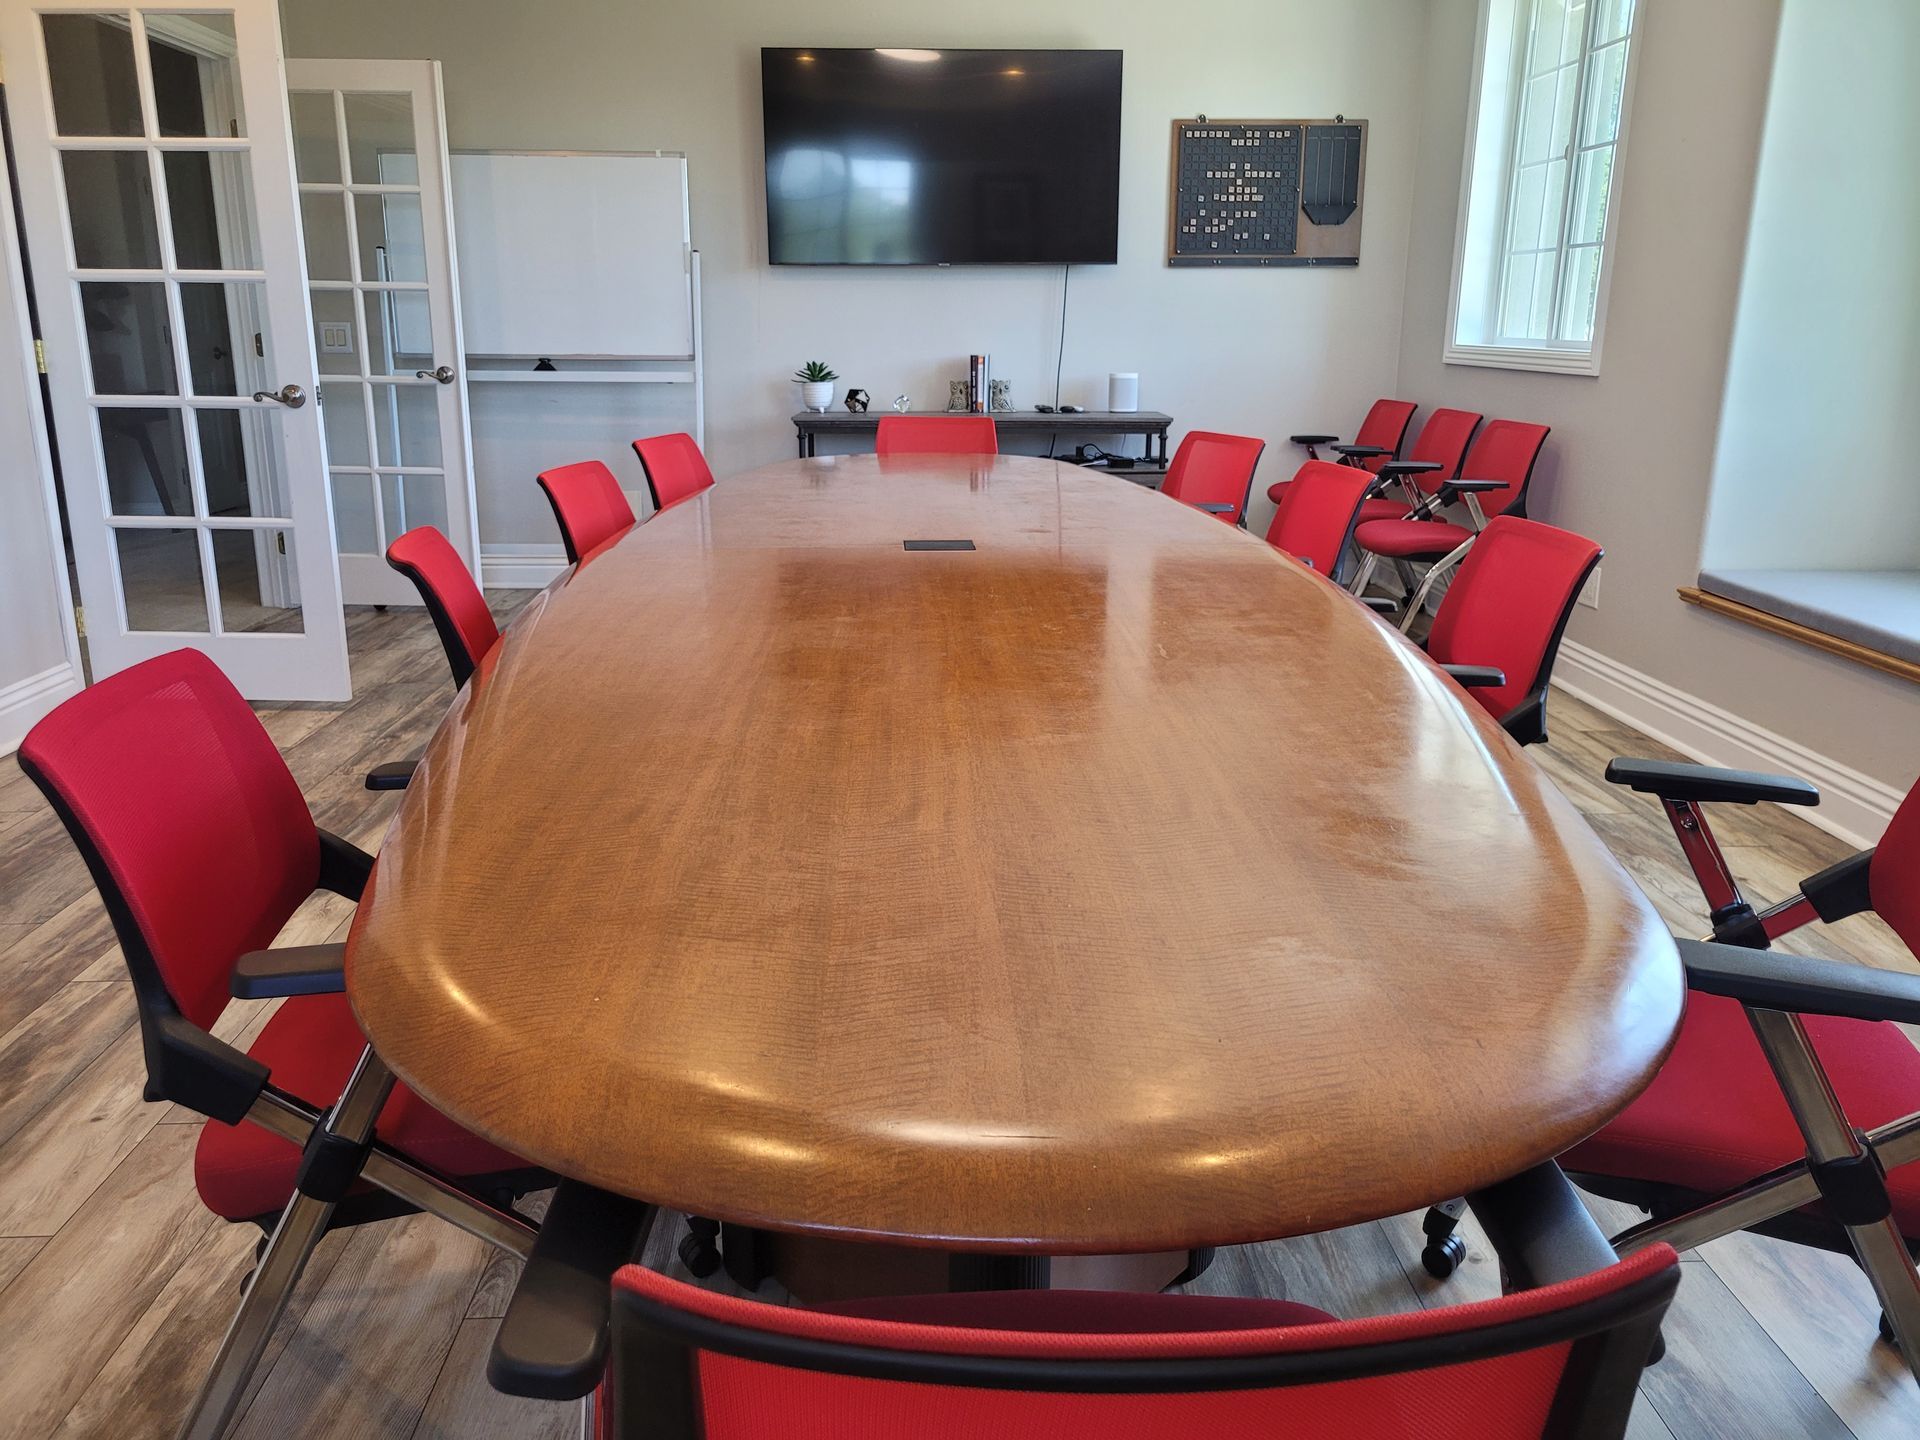 a conference room with a long wooden table and red chairs